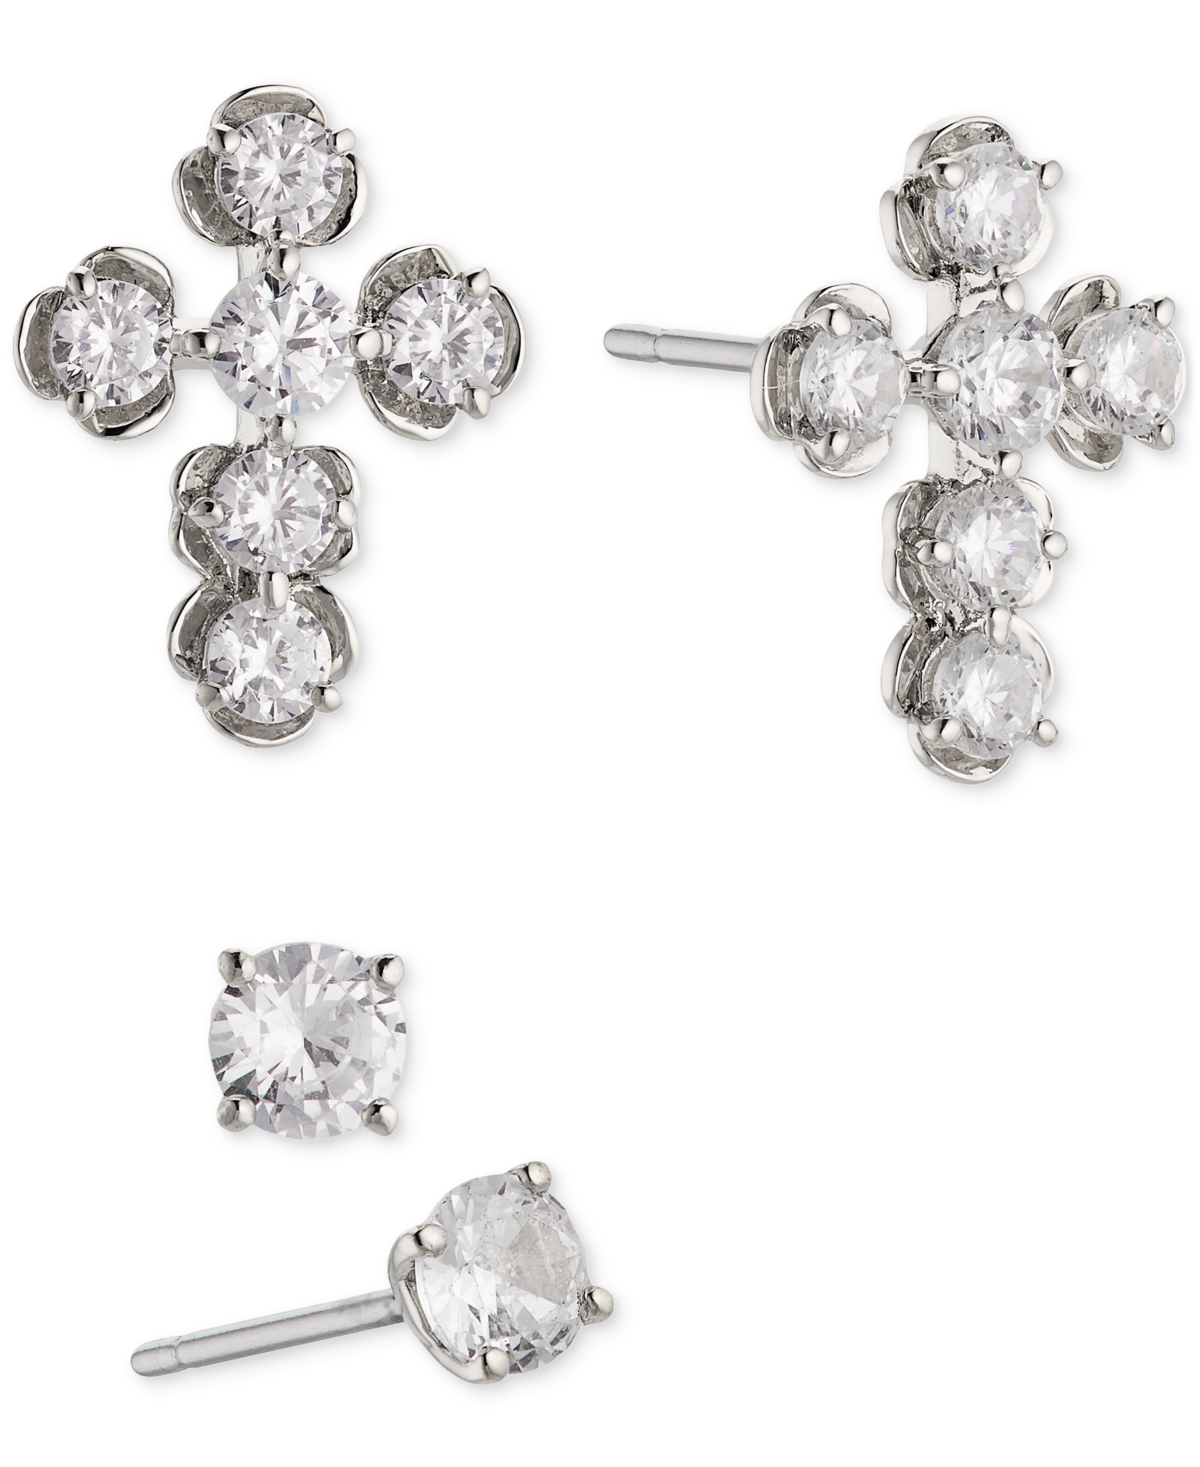 Rhodium-Plated 2-Pc. Set Cubic Zirconia Floral Cross & Solitaire Stud Earrings, Created for Macy's - Rhodium